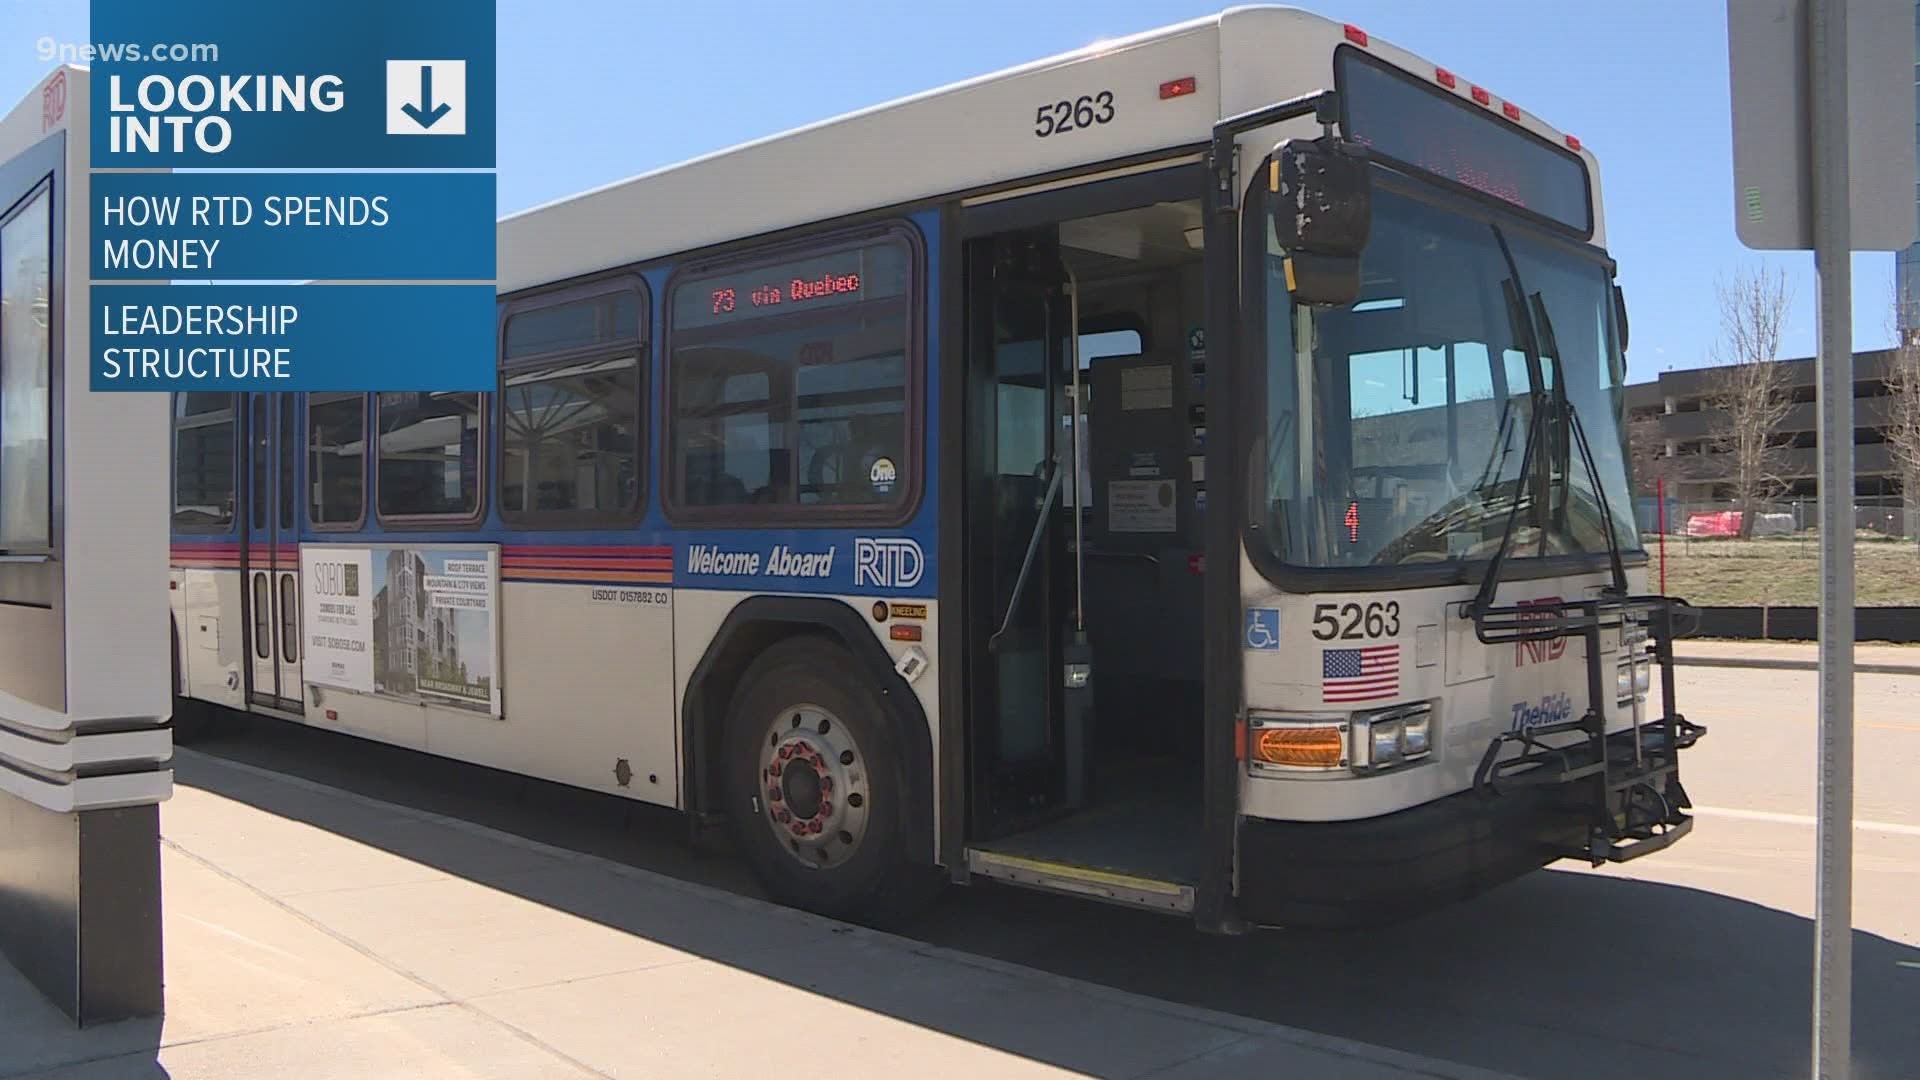 An committee announced by Gov. Polis will spend the next year examining how the RTD operates and spends it's money amid a projected $252 million budget shortfall.